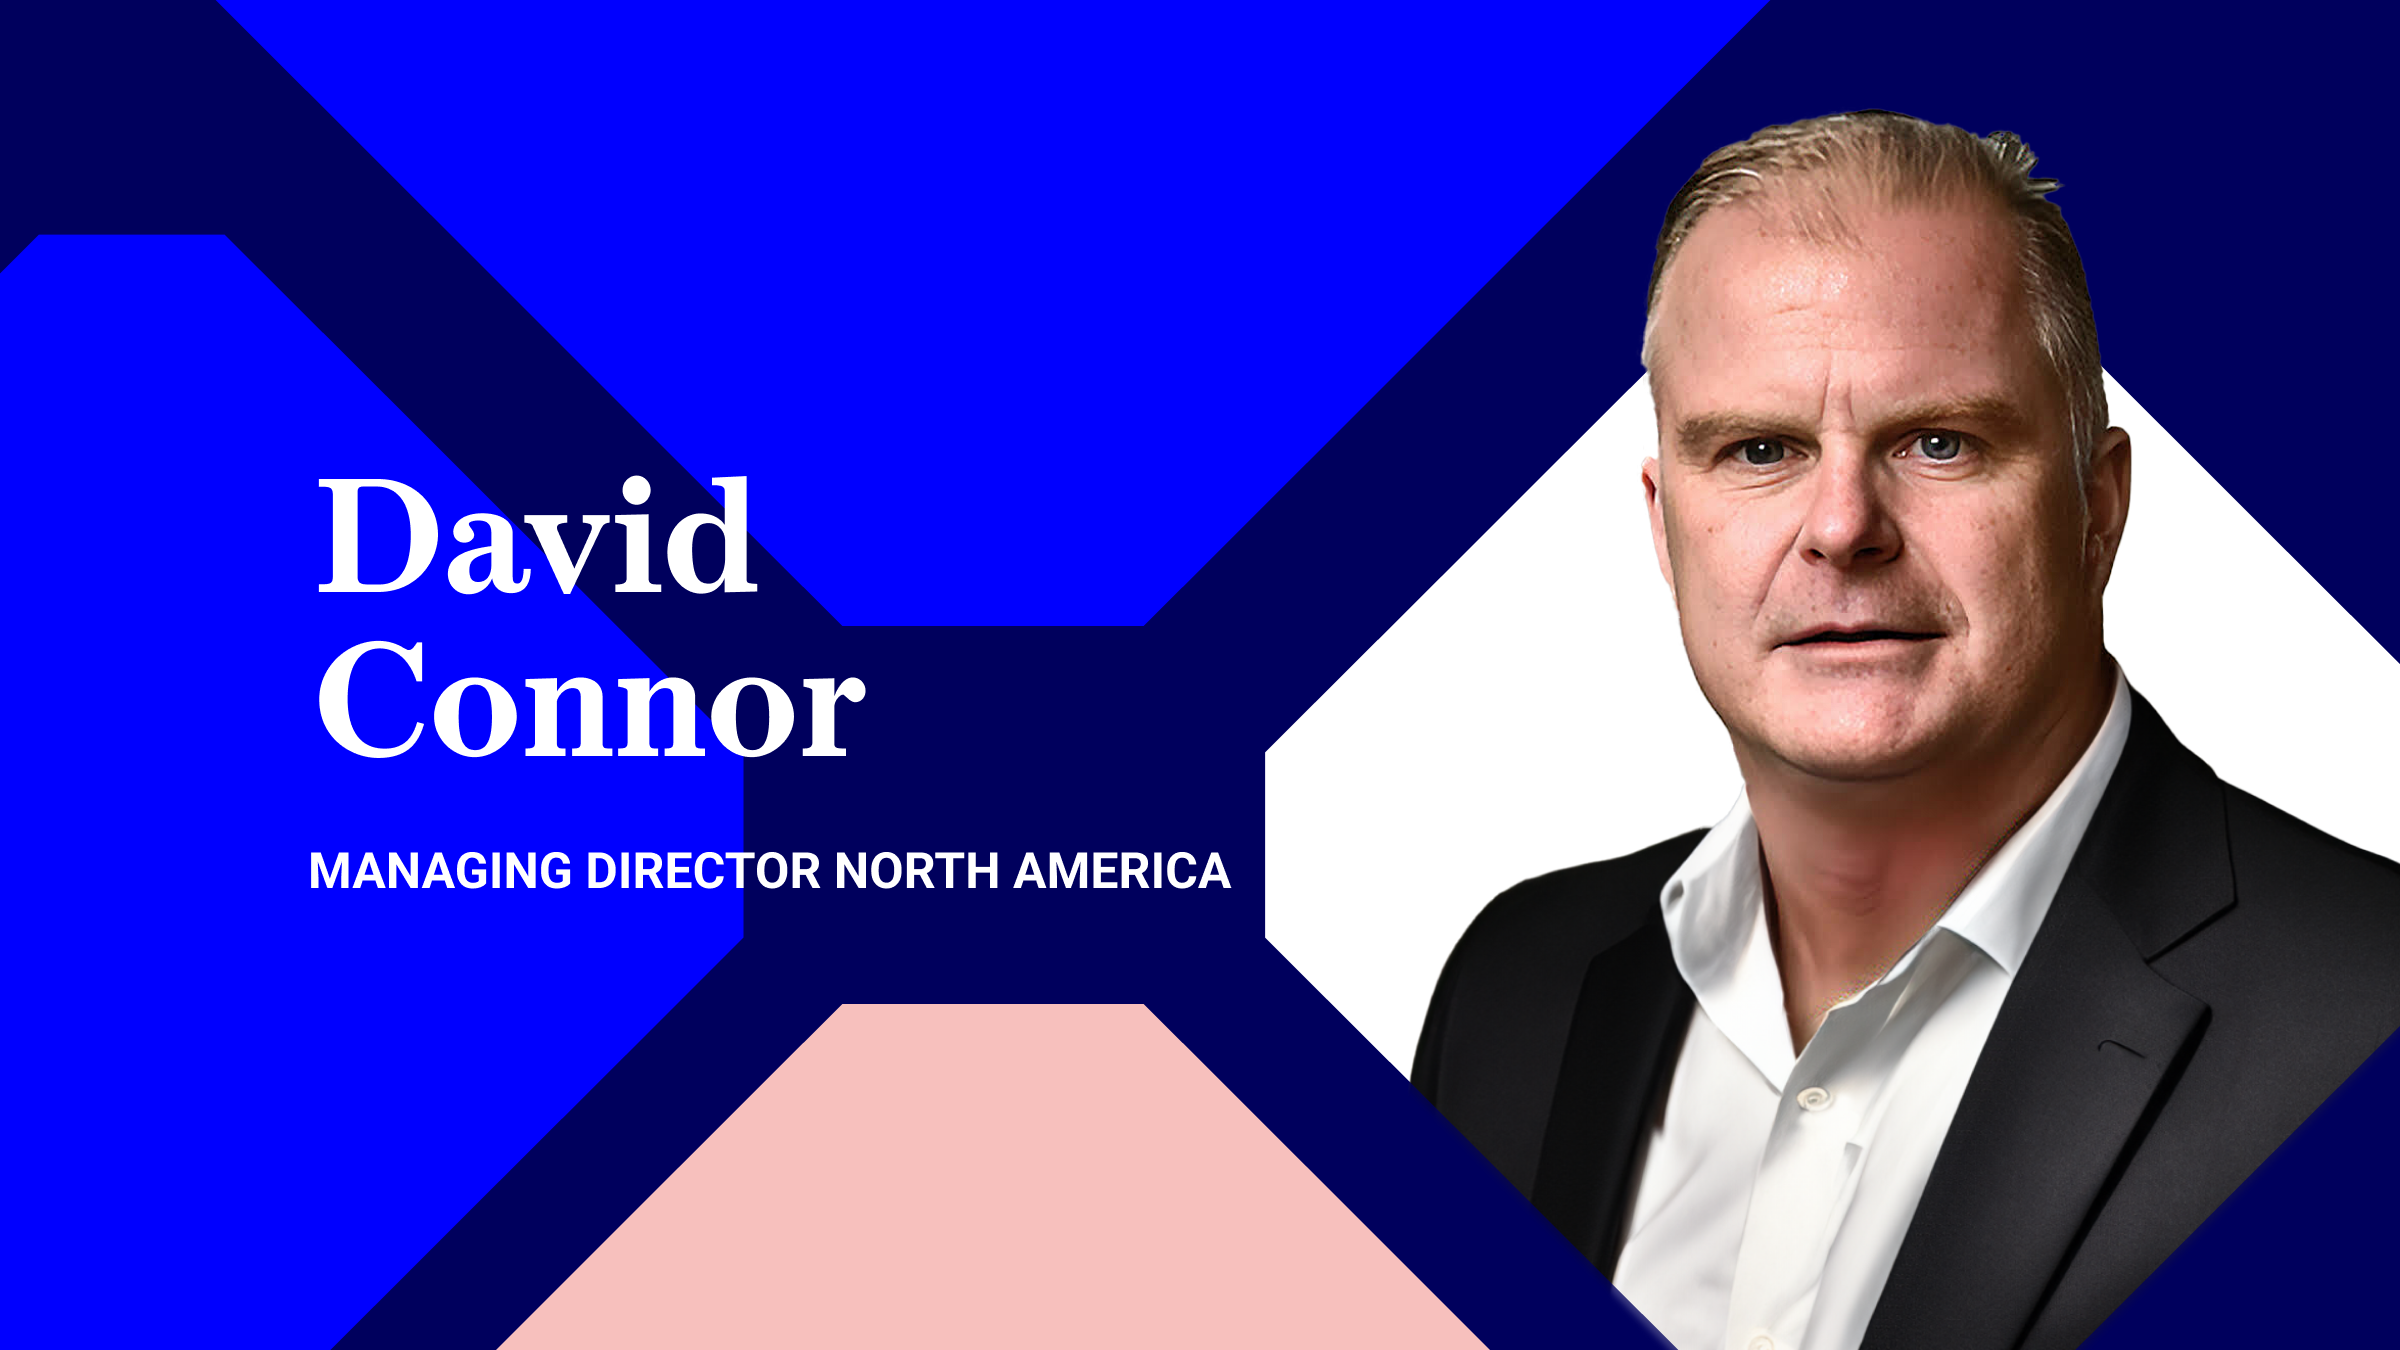 Reflecting on the past and future with David Connor